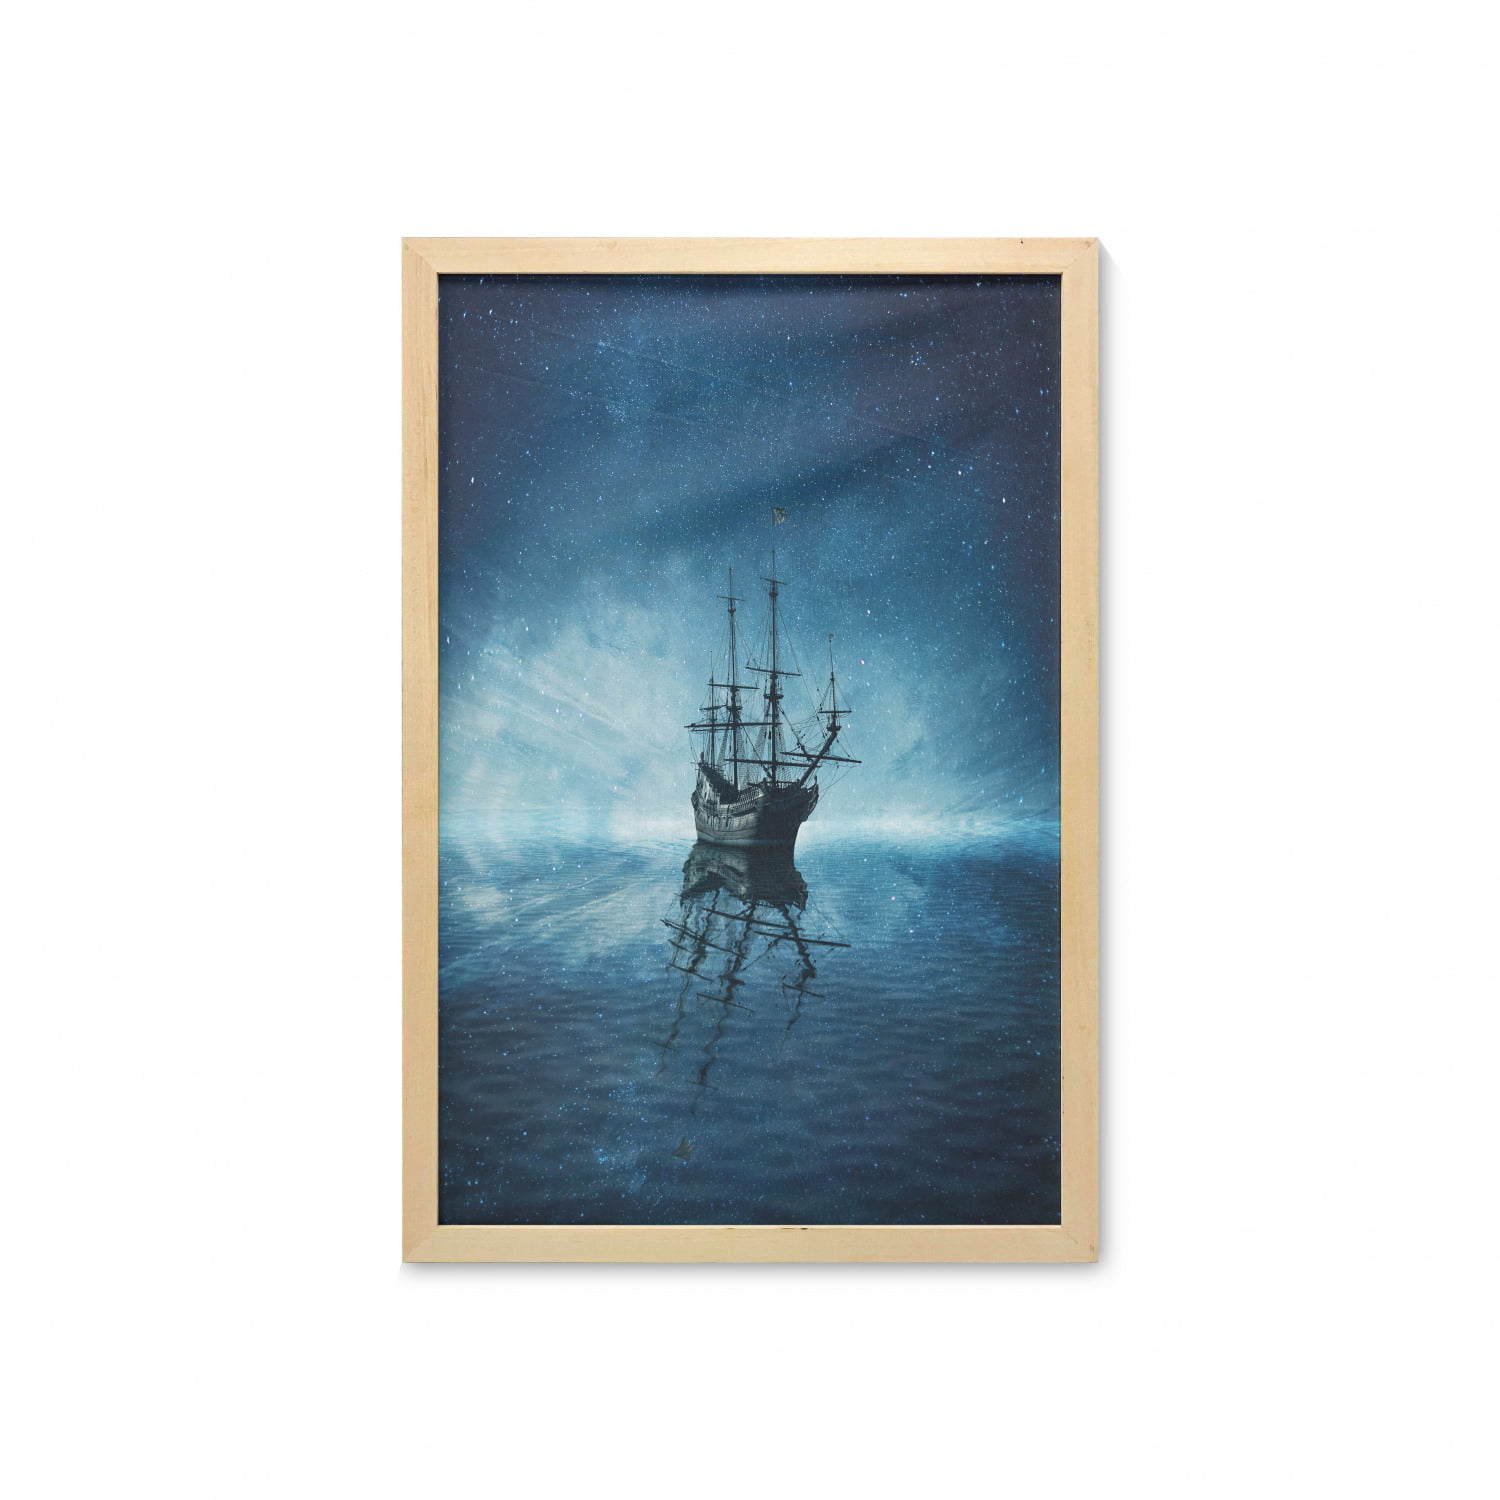 Pirate Ships on the High Seas Picture Poster Art Ocean Sailing Framed Print 